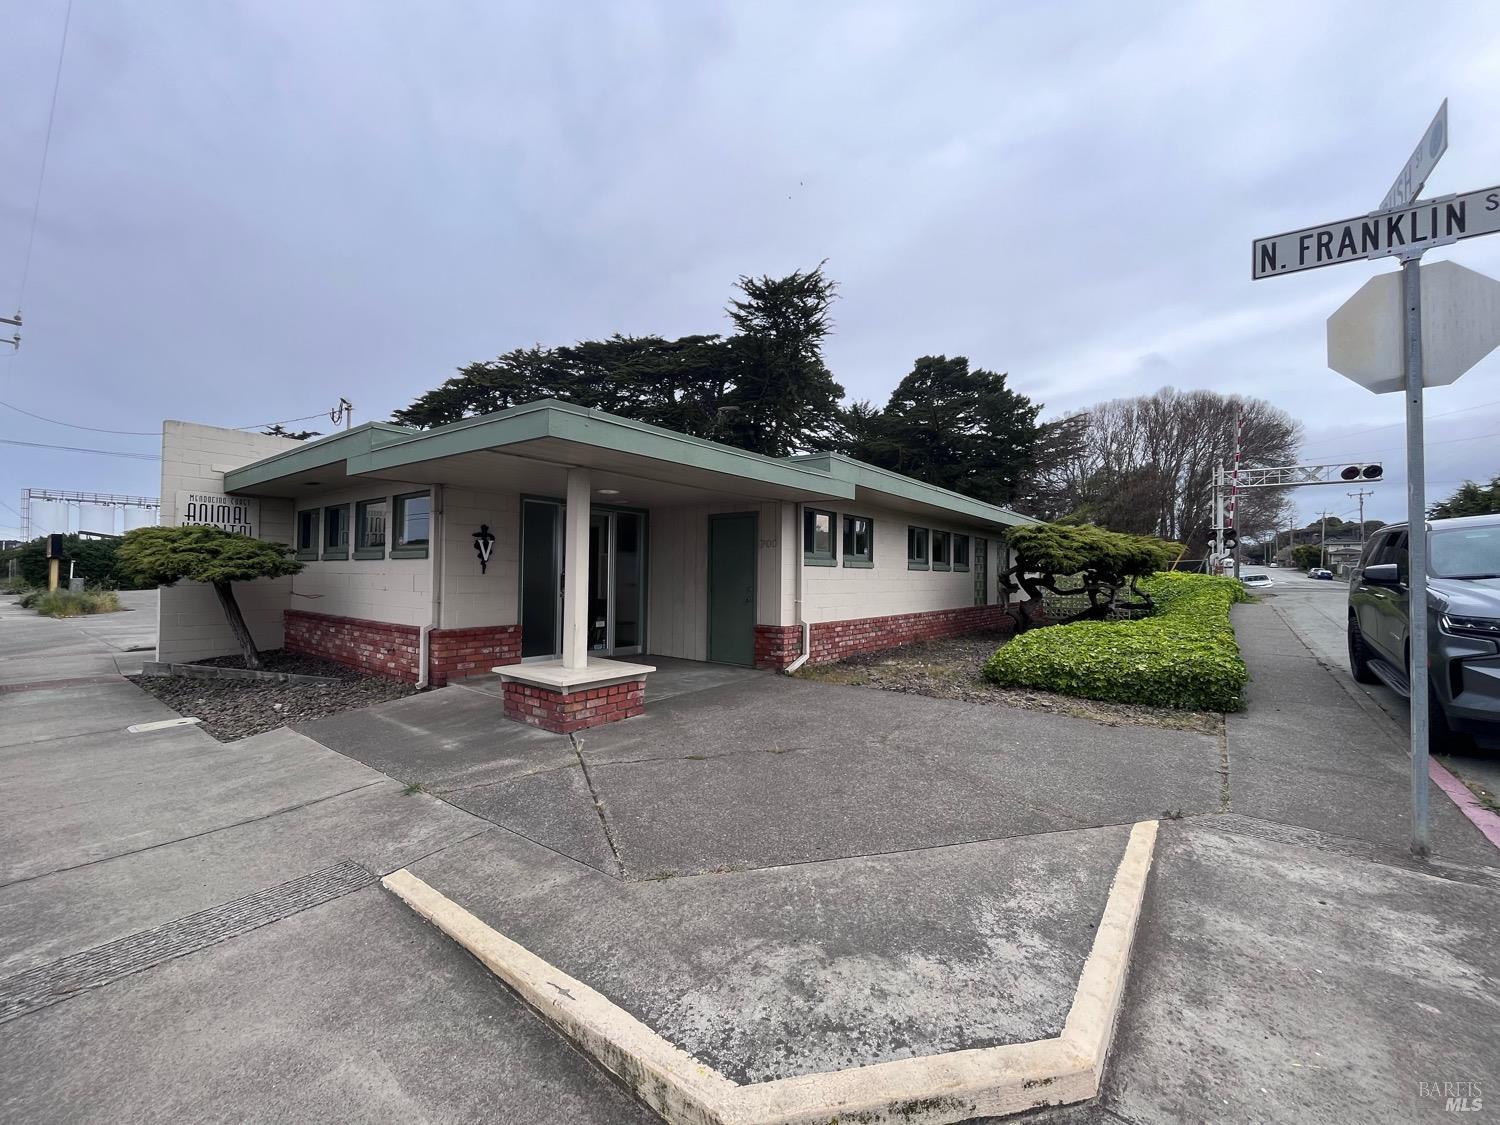 Photo of 700 N Franklin St in Fort Bragg, CA